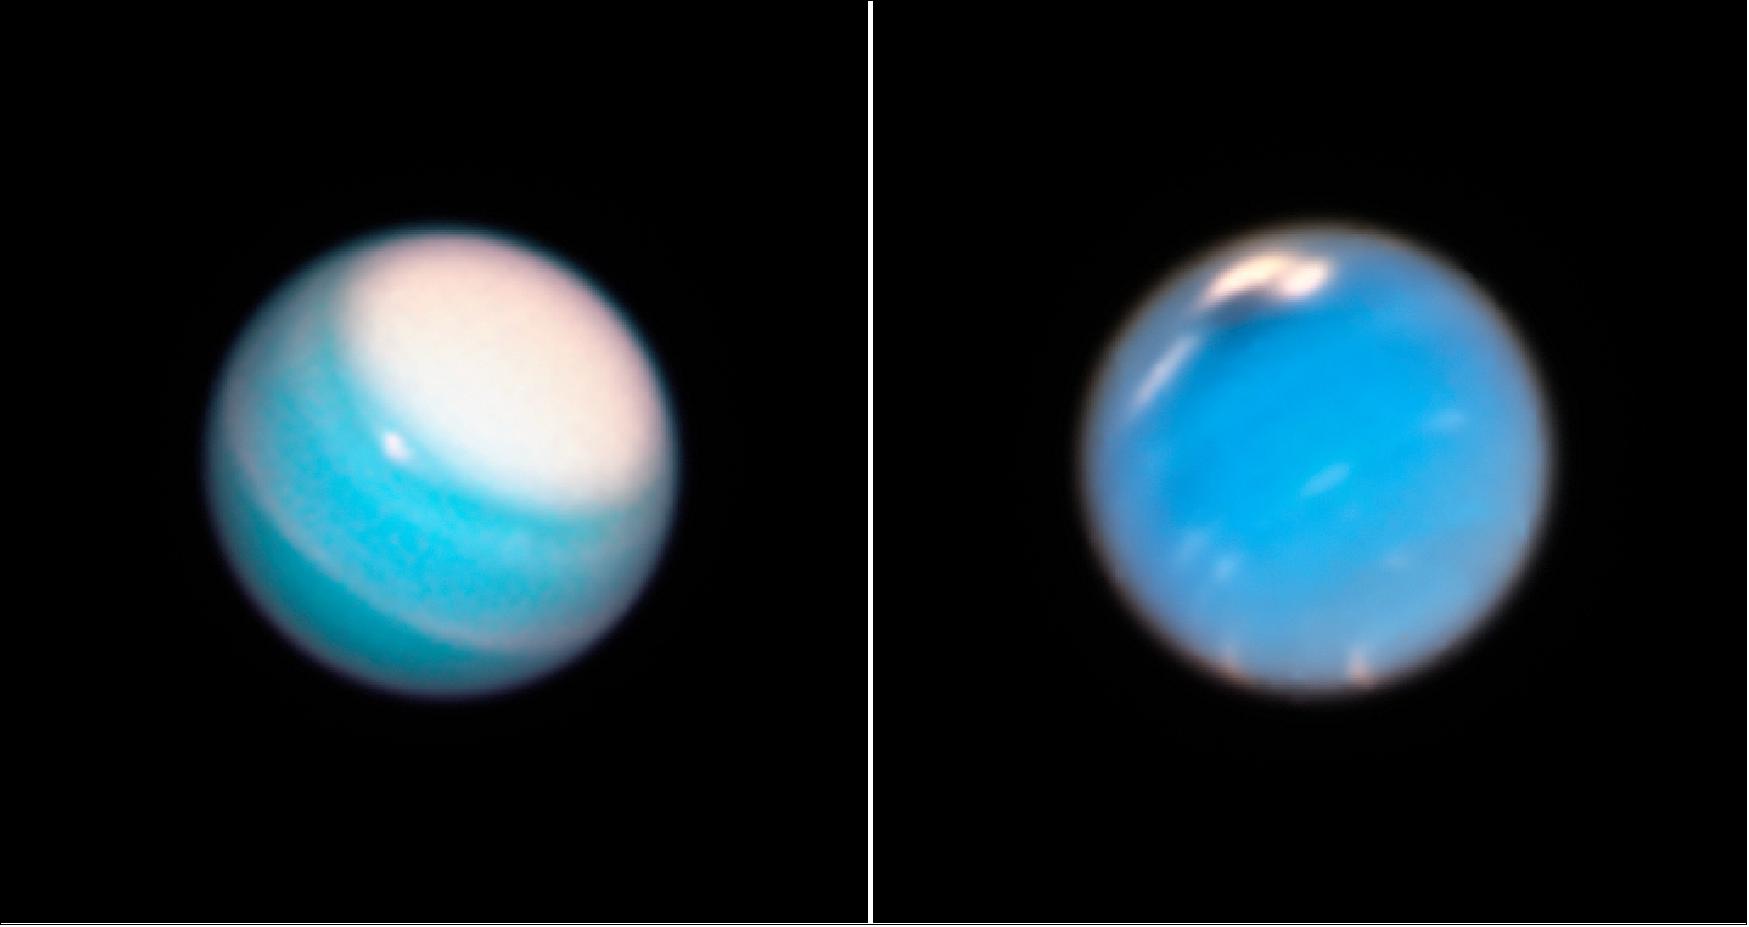 Figure 72: During its routine yearly monitoring of the weather on our solar system's outer planets, NASA's Hubble Space Telescope has uncovered a new mysterious dark storm on Neptune (right, image taken with WFC3 in September and November 2018) and provided a fresh look at a long-lived storm circling around the north polar region on Uranus (left). The Uranus image was taken with the WFC3 of Hubble in November 2018. [image credit: NASA, ESA, A. Simon (NASA Goddard Space Flight Center), and M. H. Wong and A. Hsu (University of California, Berkeley)]